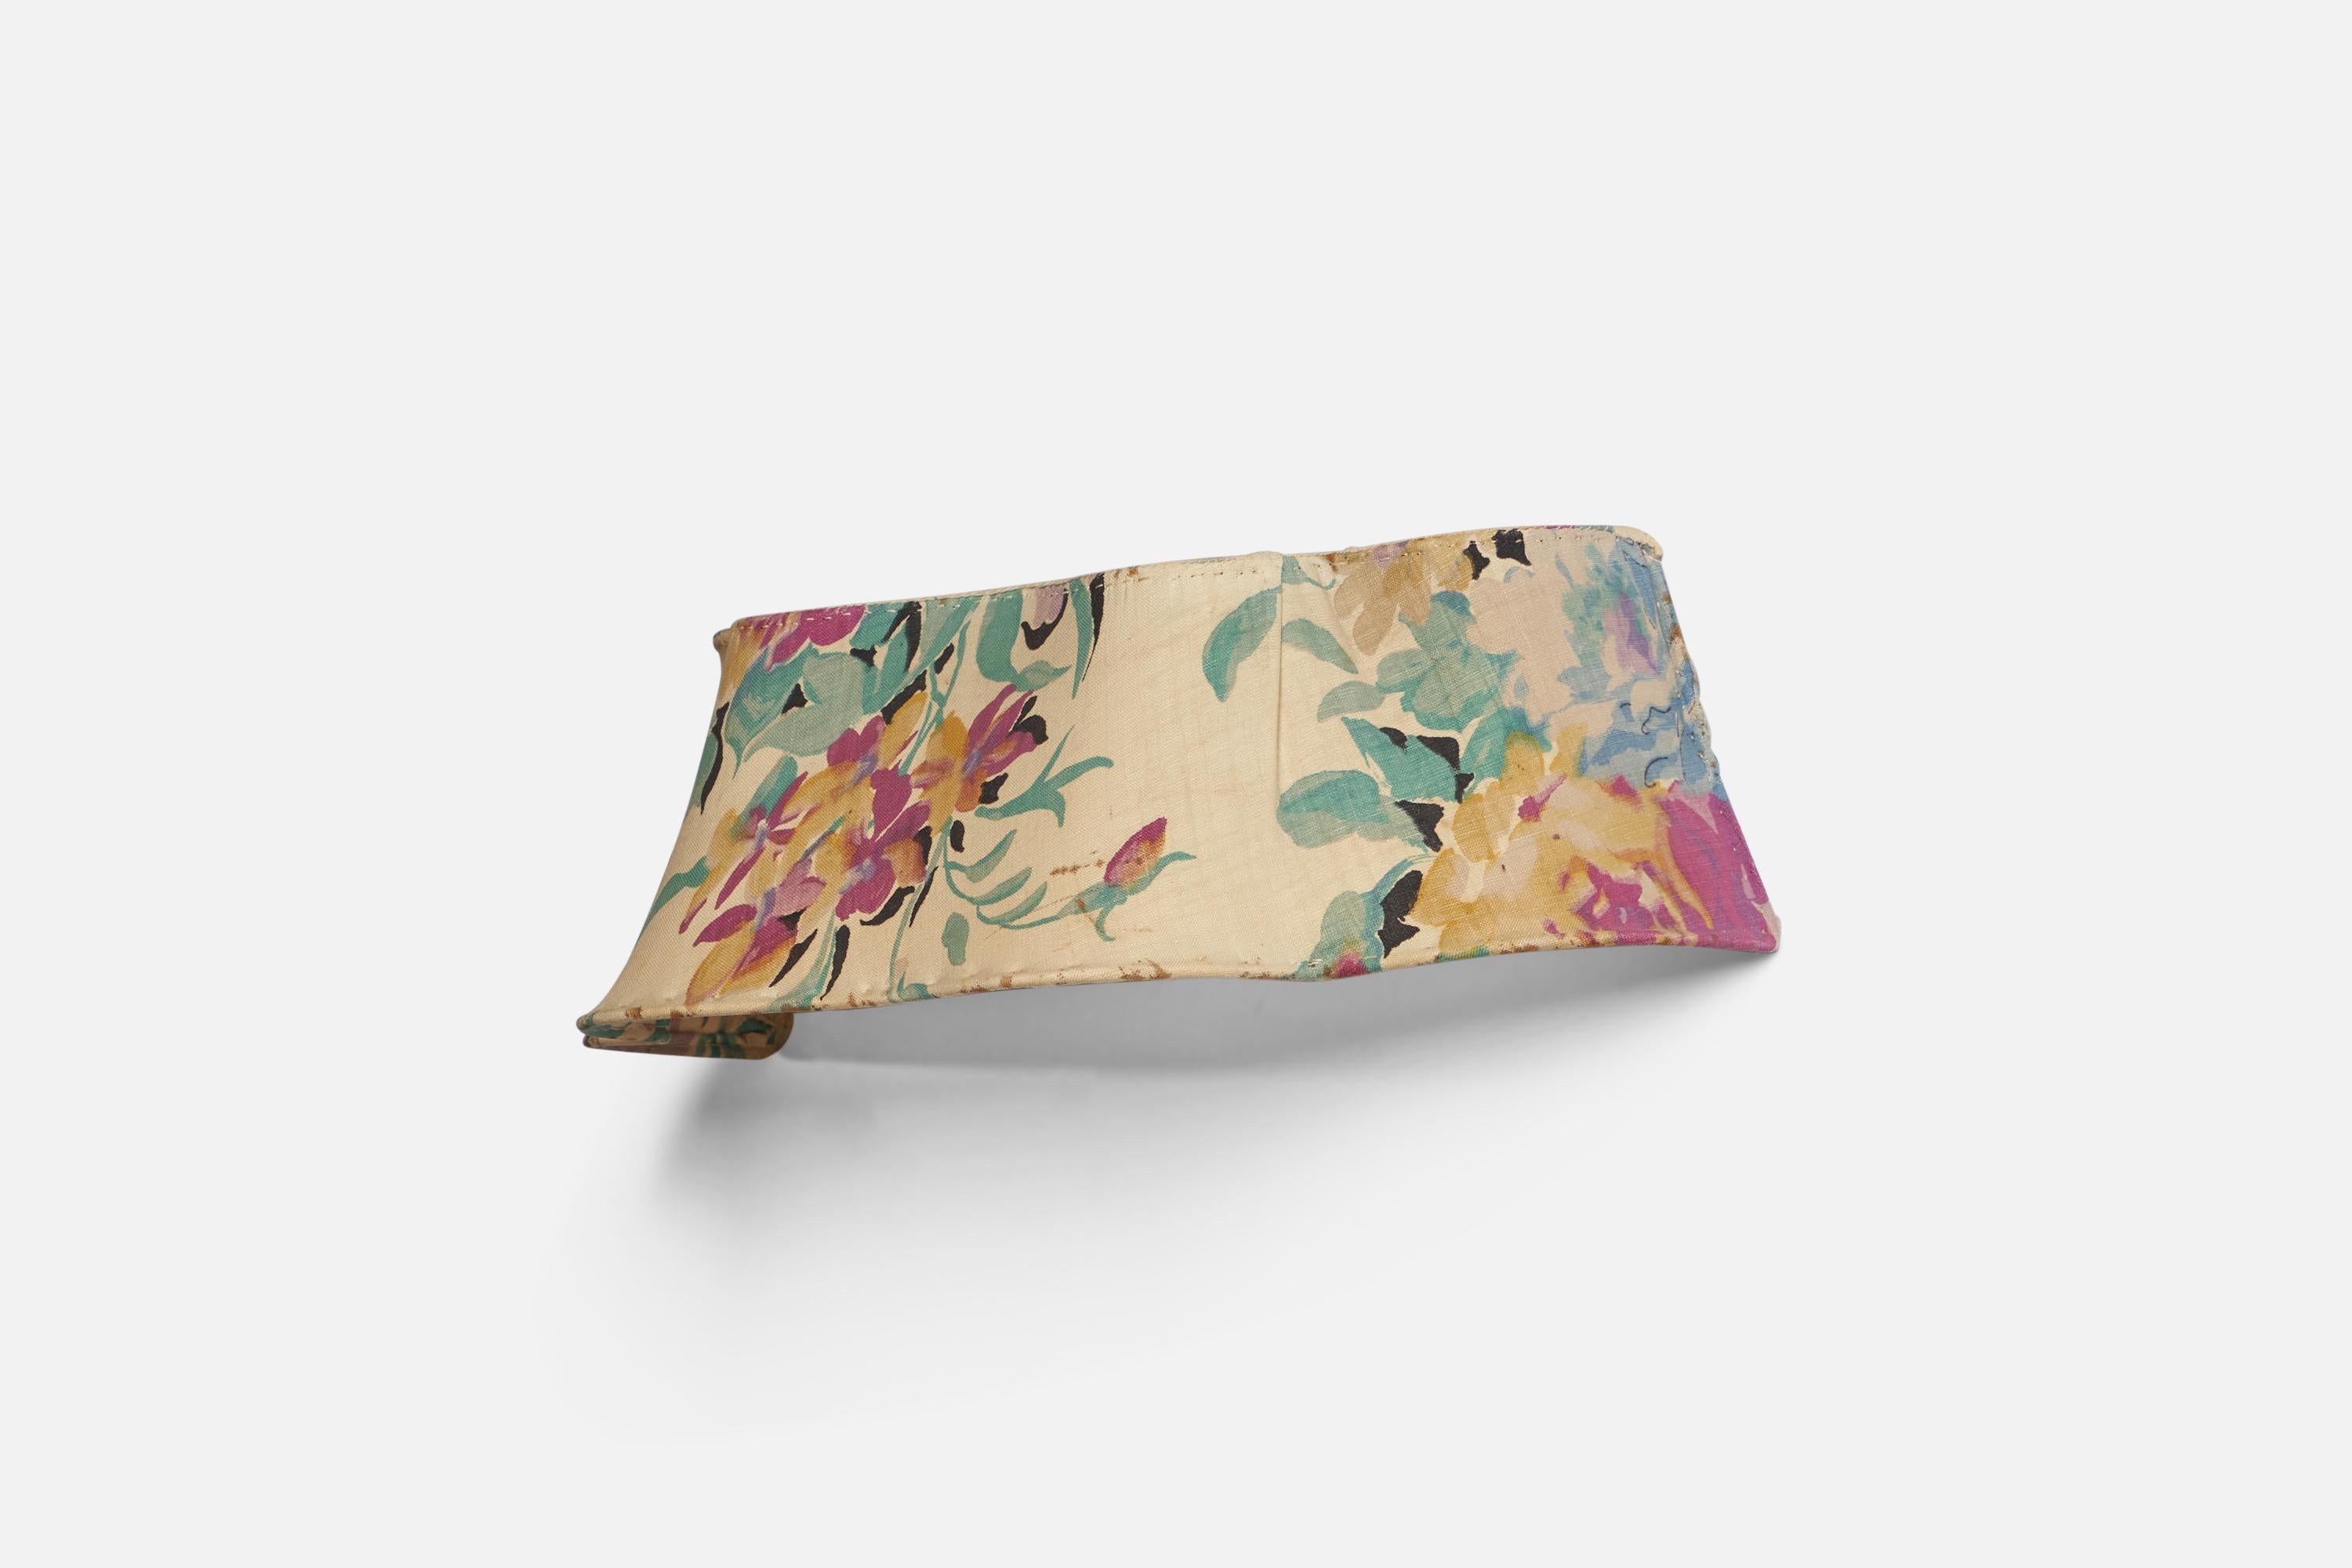 A printed floral fabric wall light, designed and produced in Sweden, c. 1940s.
Overall Dimensions (inches): 13.25